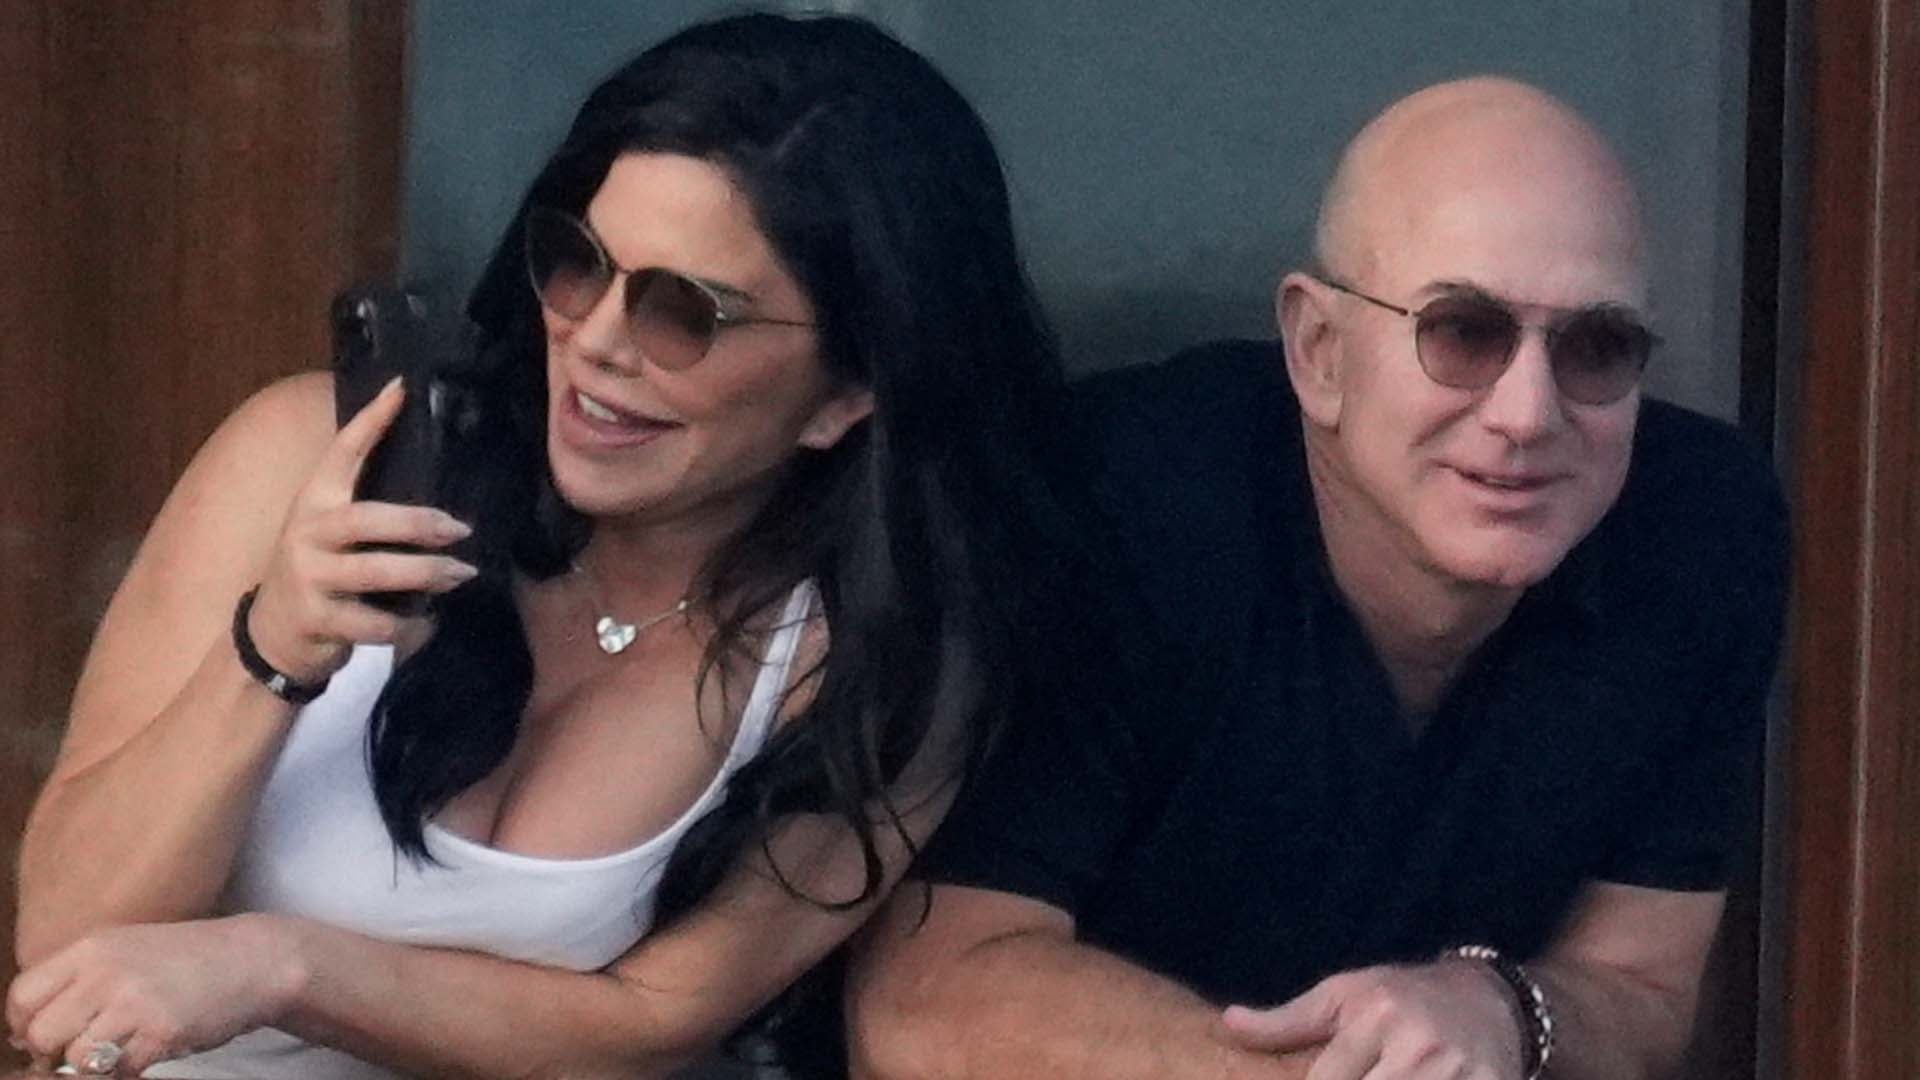 Jeff Bezos and Lauren Sanchez Engaged: Everything to Know About Their Love Story